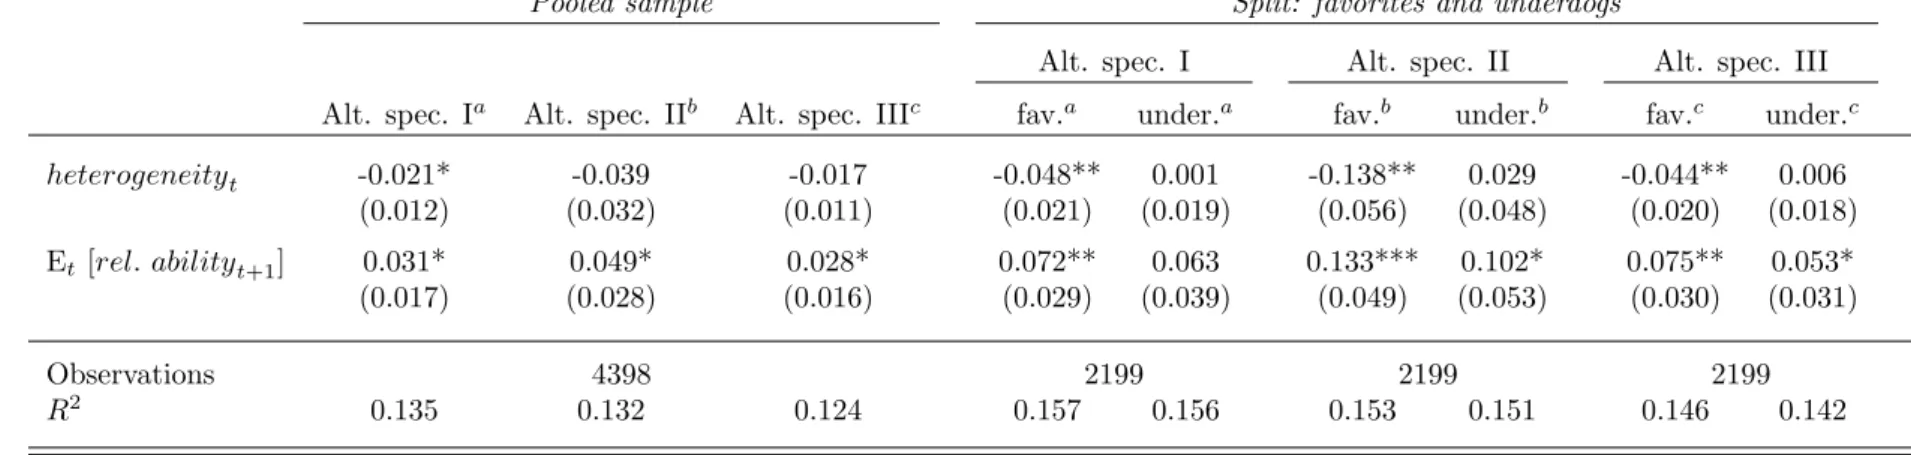 Table 3: Effect of Current and Future Heterogeneity on Effort: Alternative Specifications